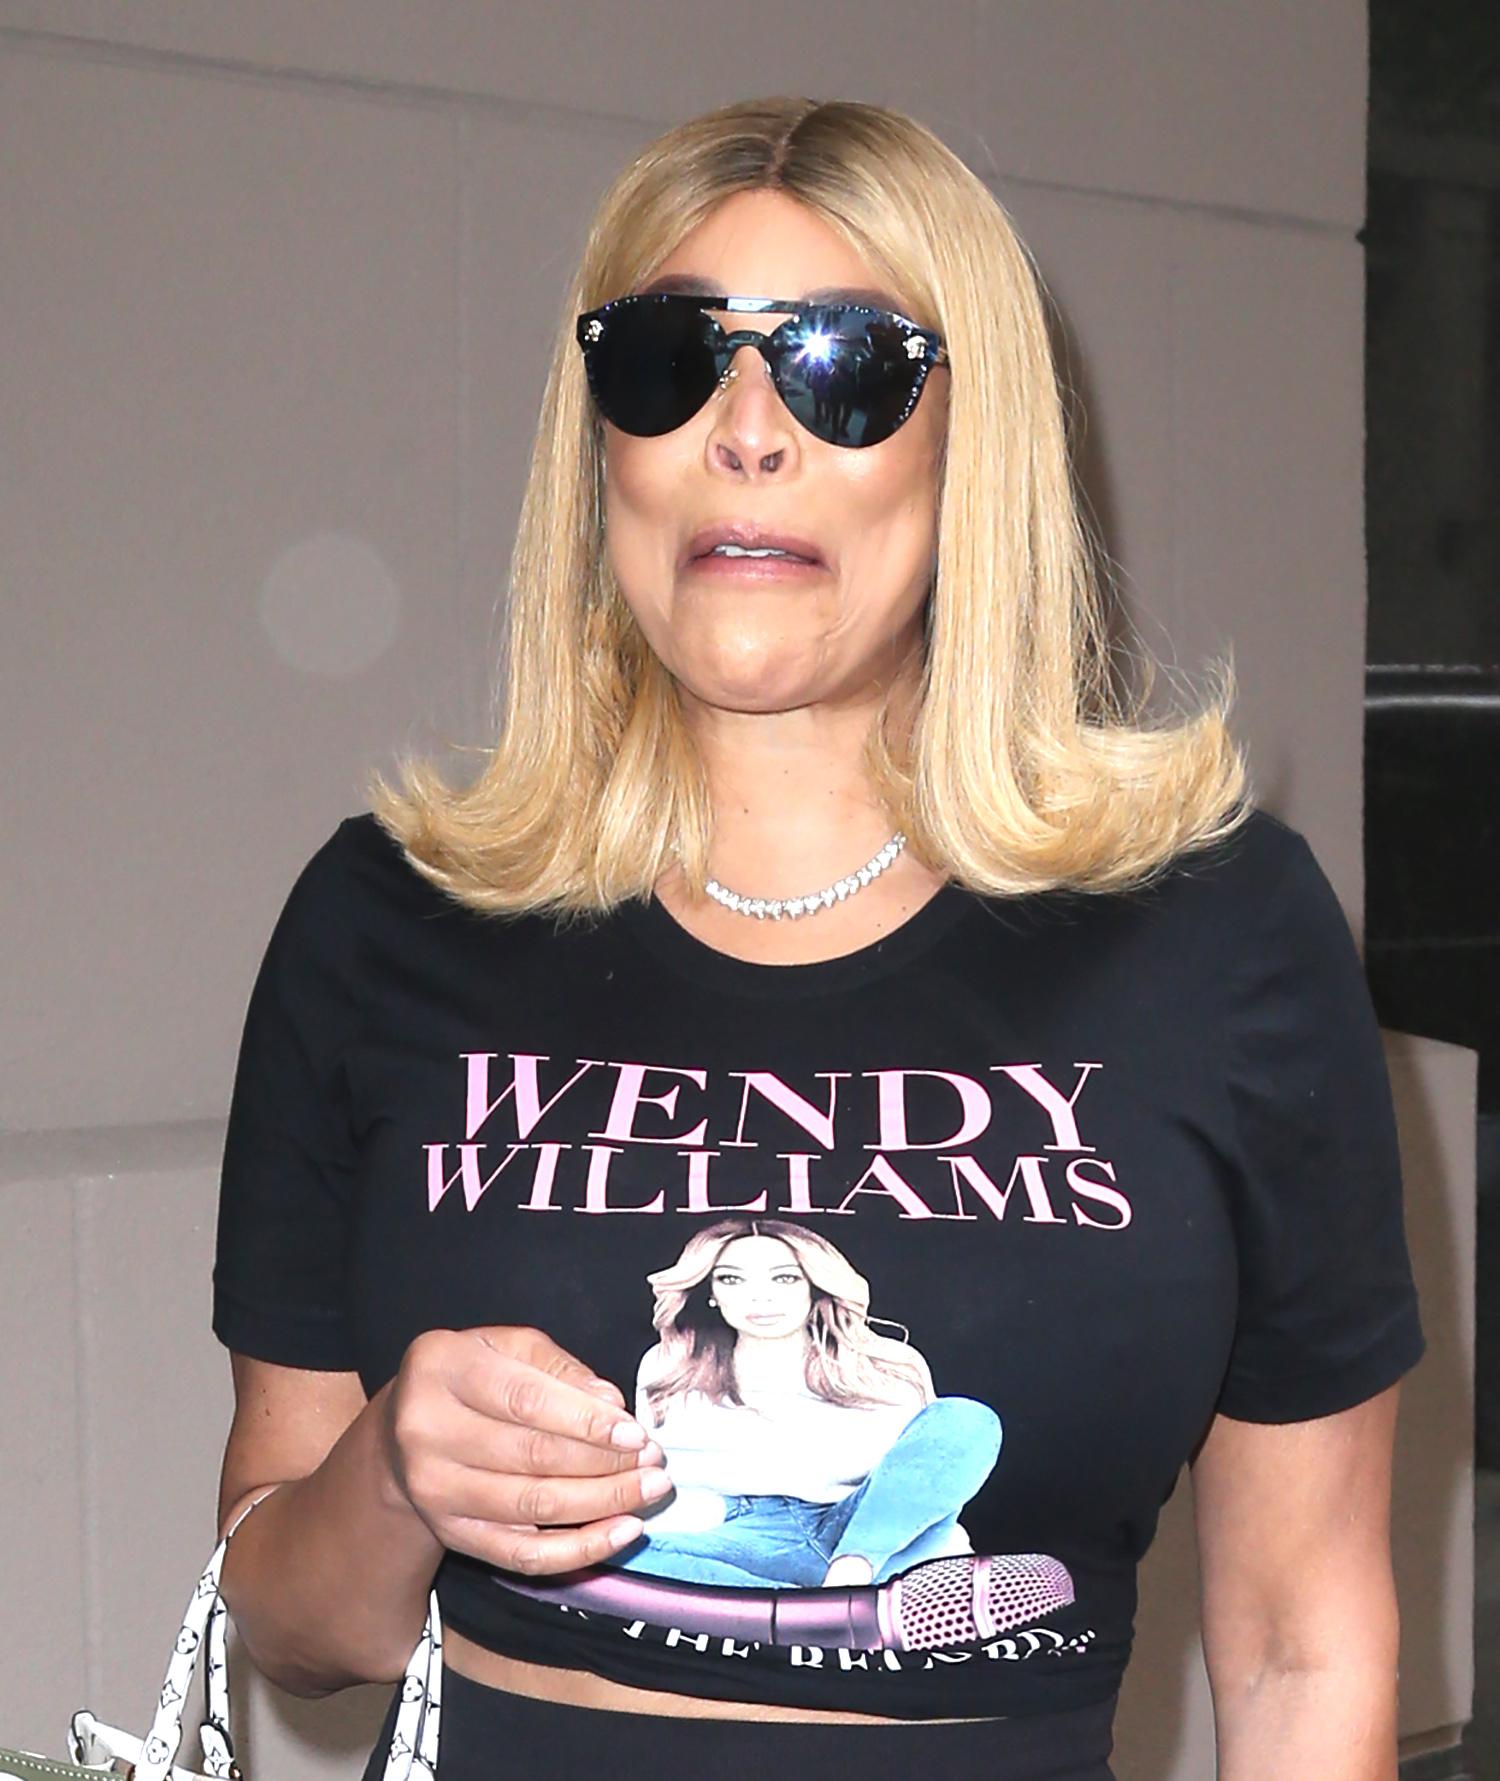 Wendy Williams' Family Speaks Out About Her 'Shocking' Struggles